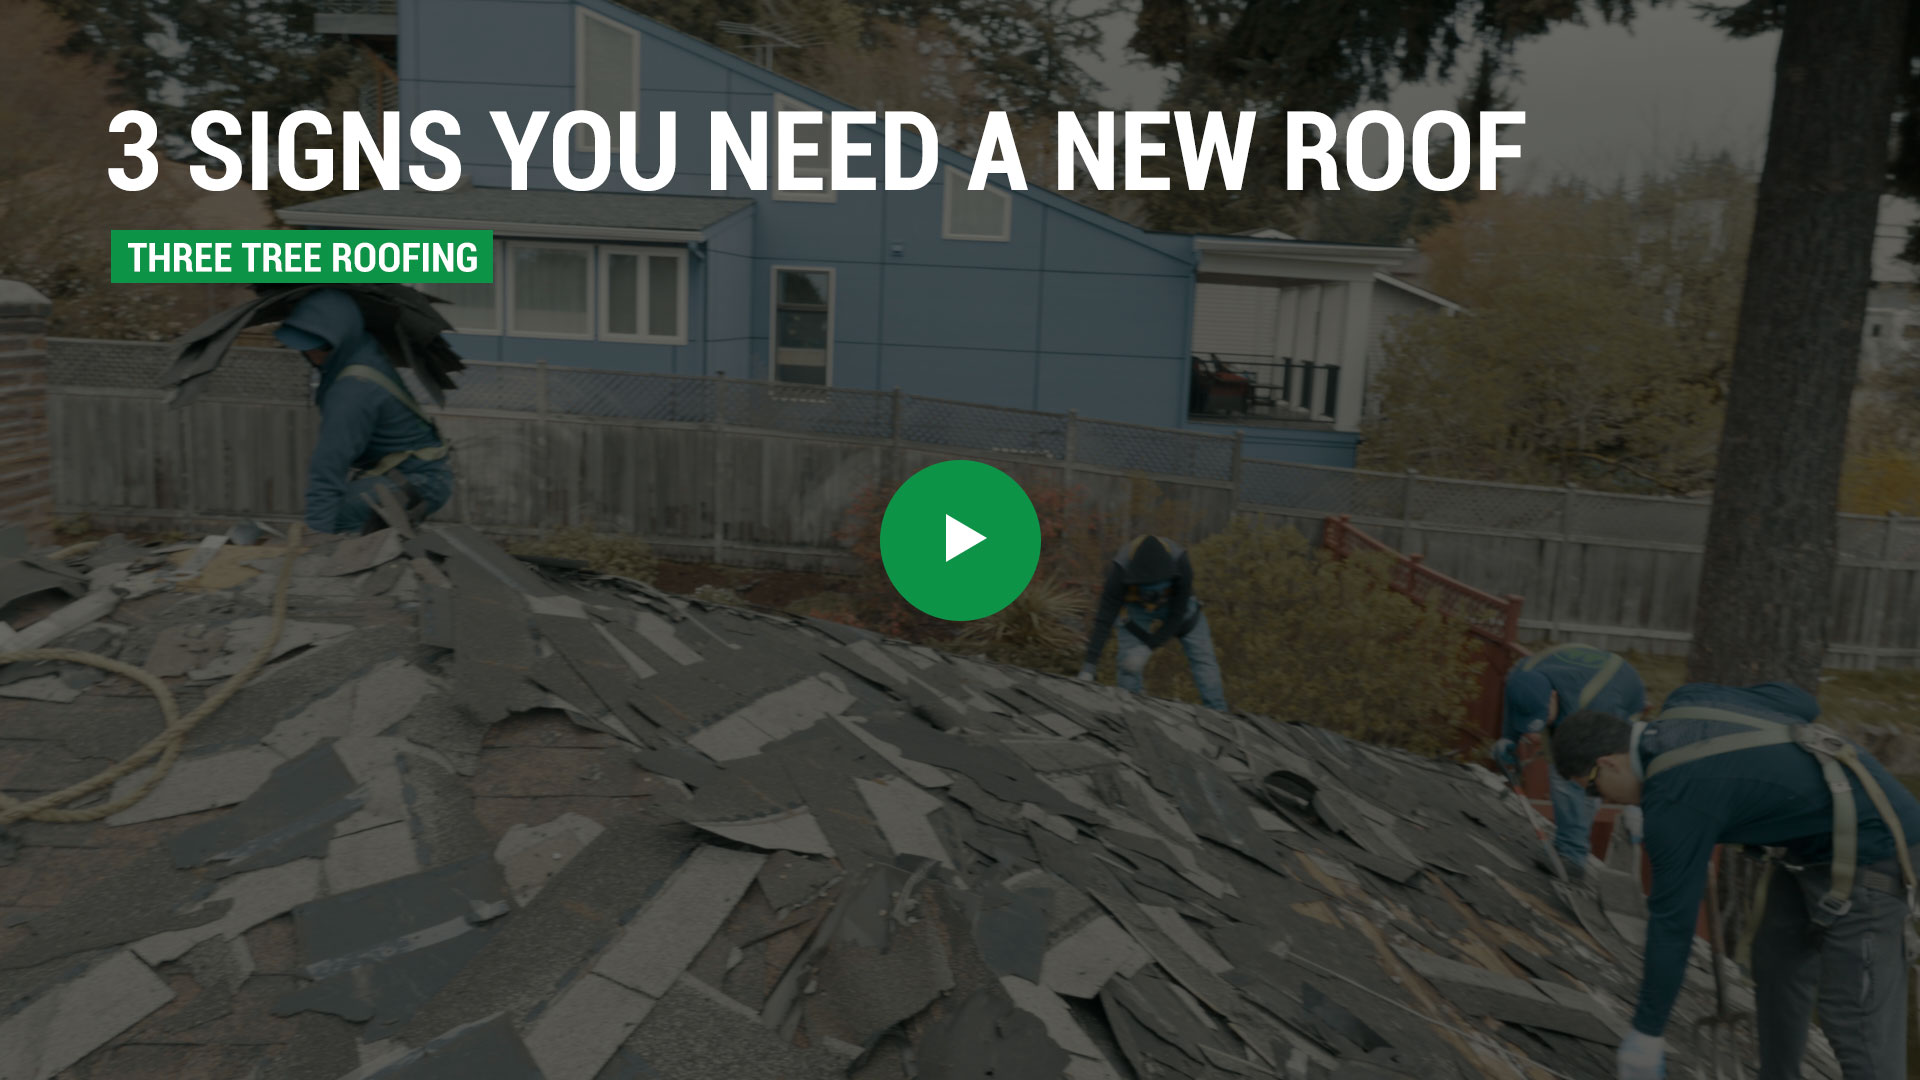 3 Signs You Need a New Roof - Roofing Video